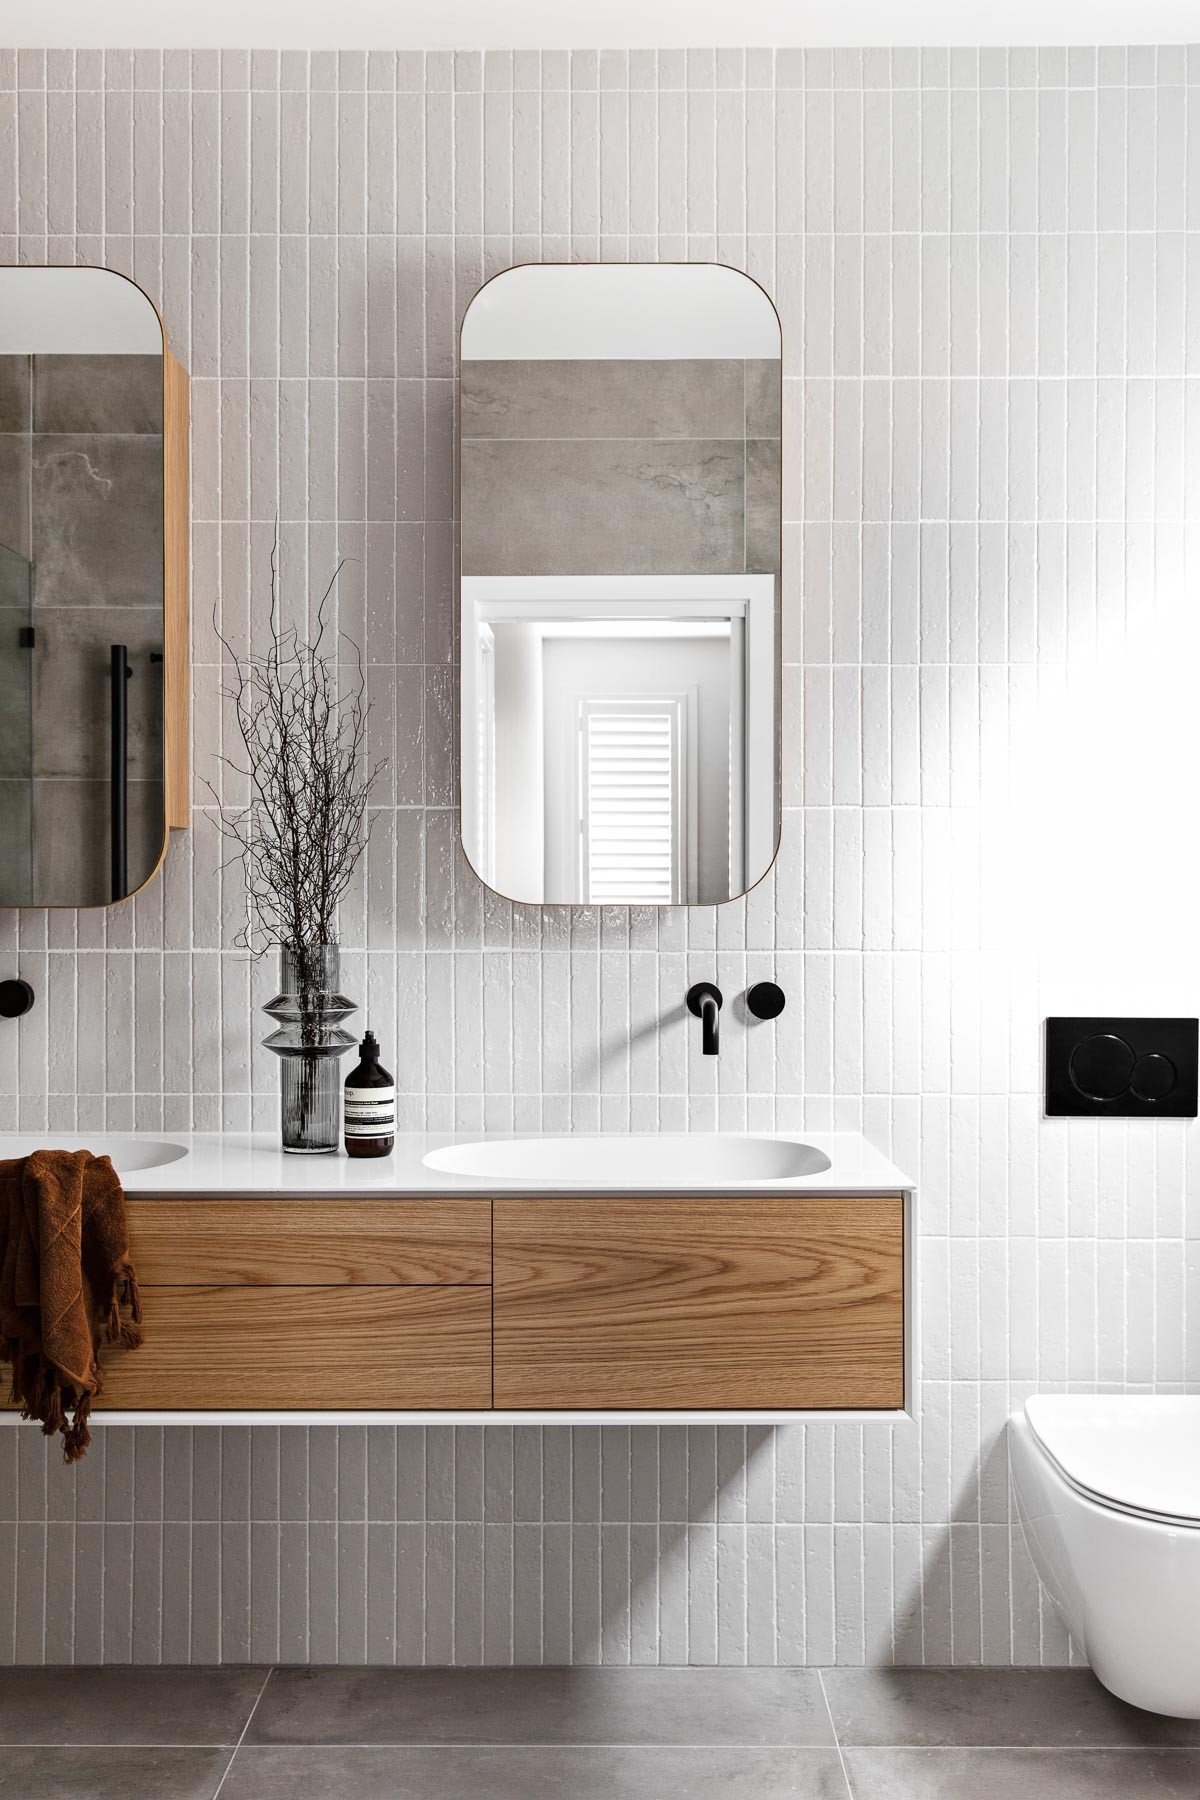 This Modern Bathroom With Curved Walls Looks Easy To Clean